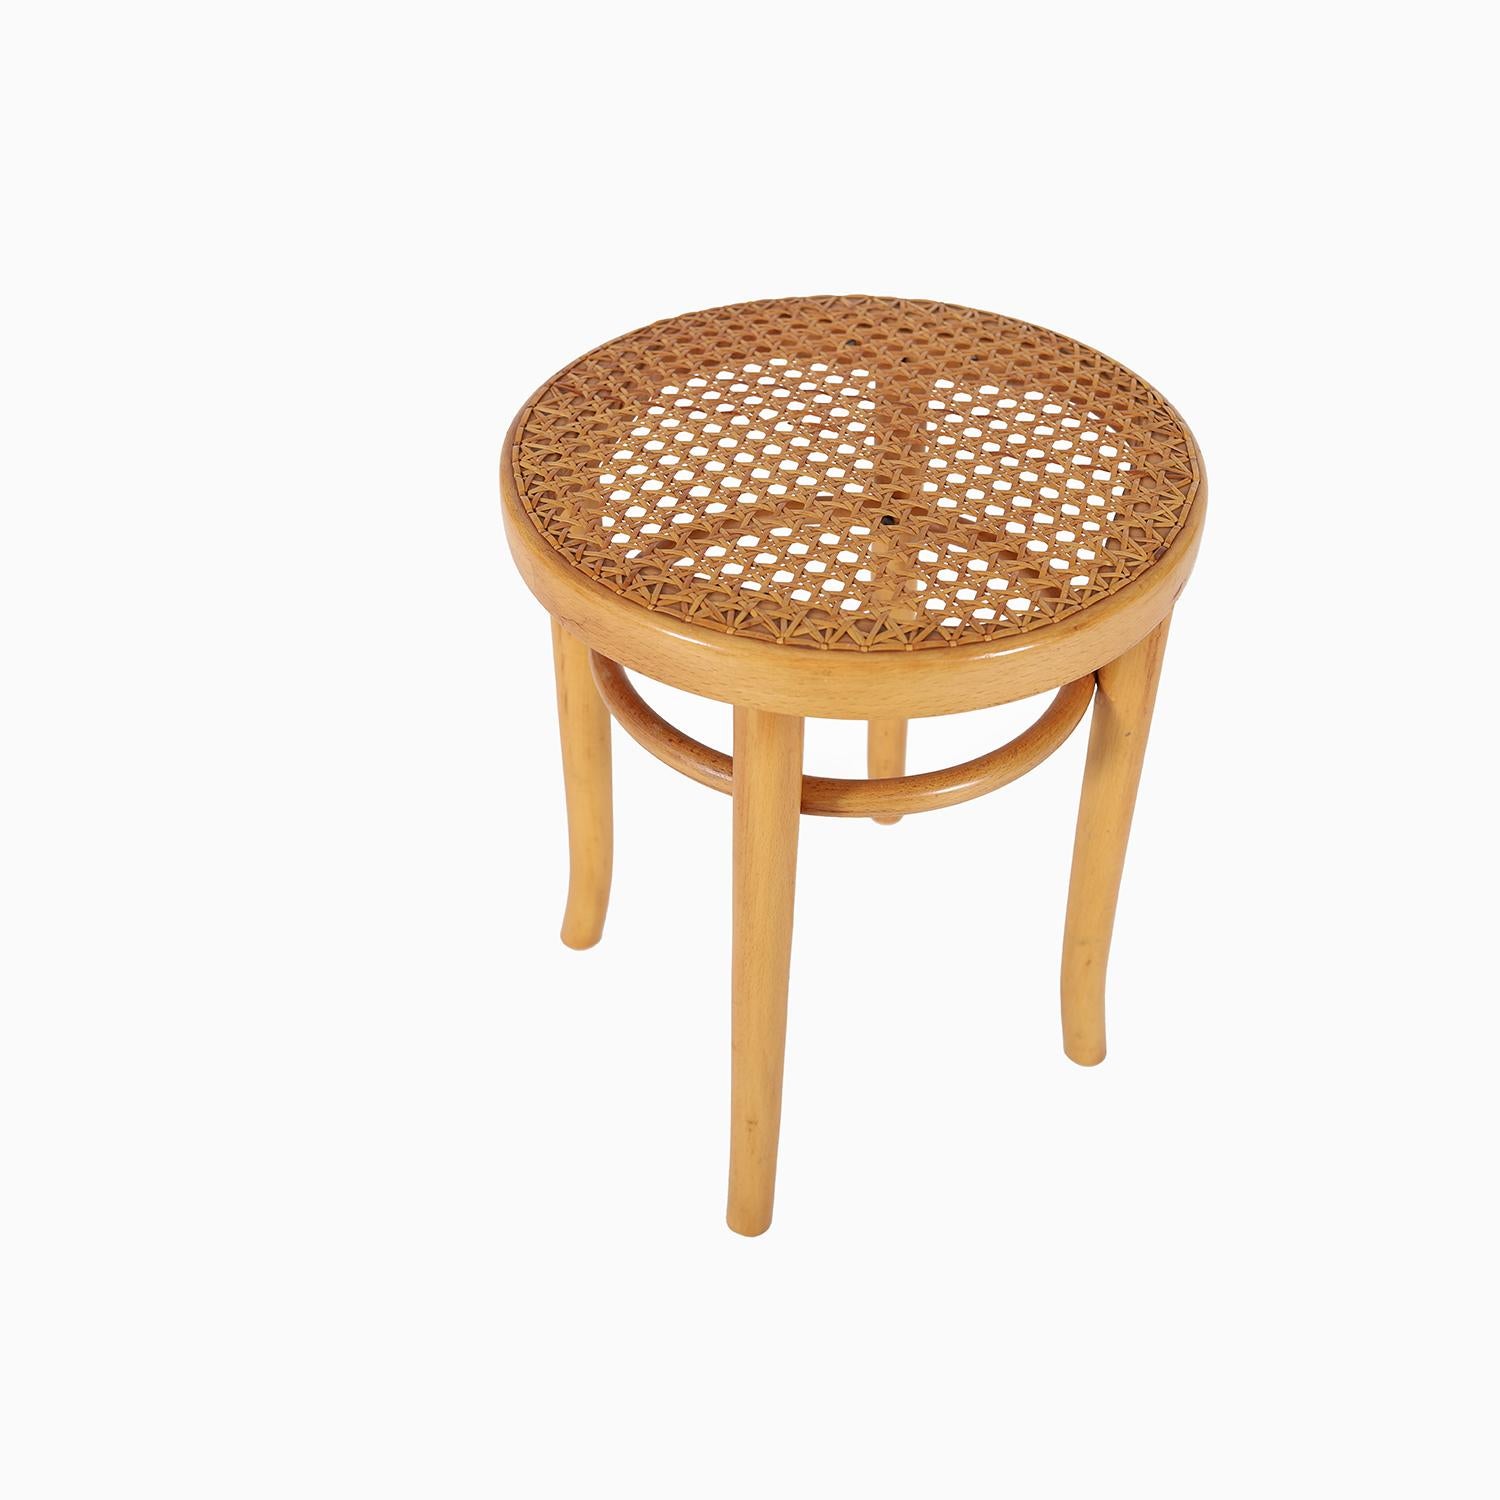 1930s, Bentwood Caned Stool In Good Condition For Sale In Minneapolis, MN